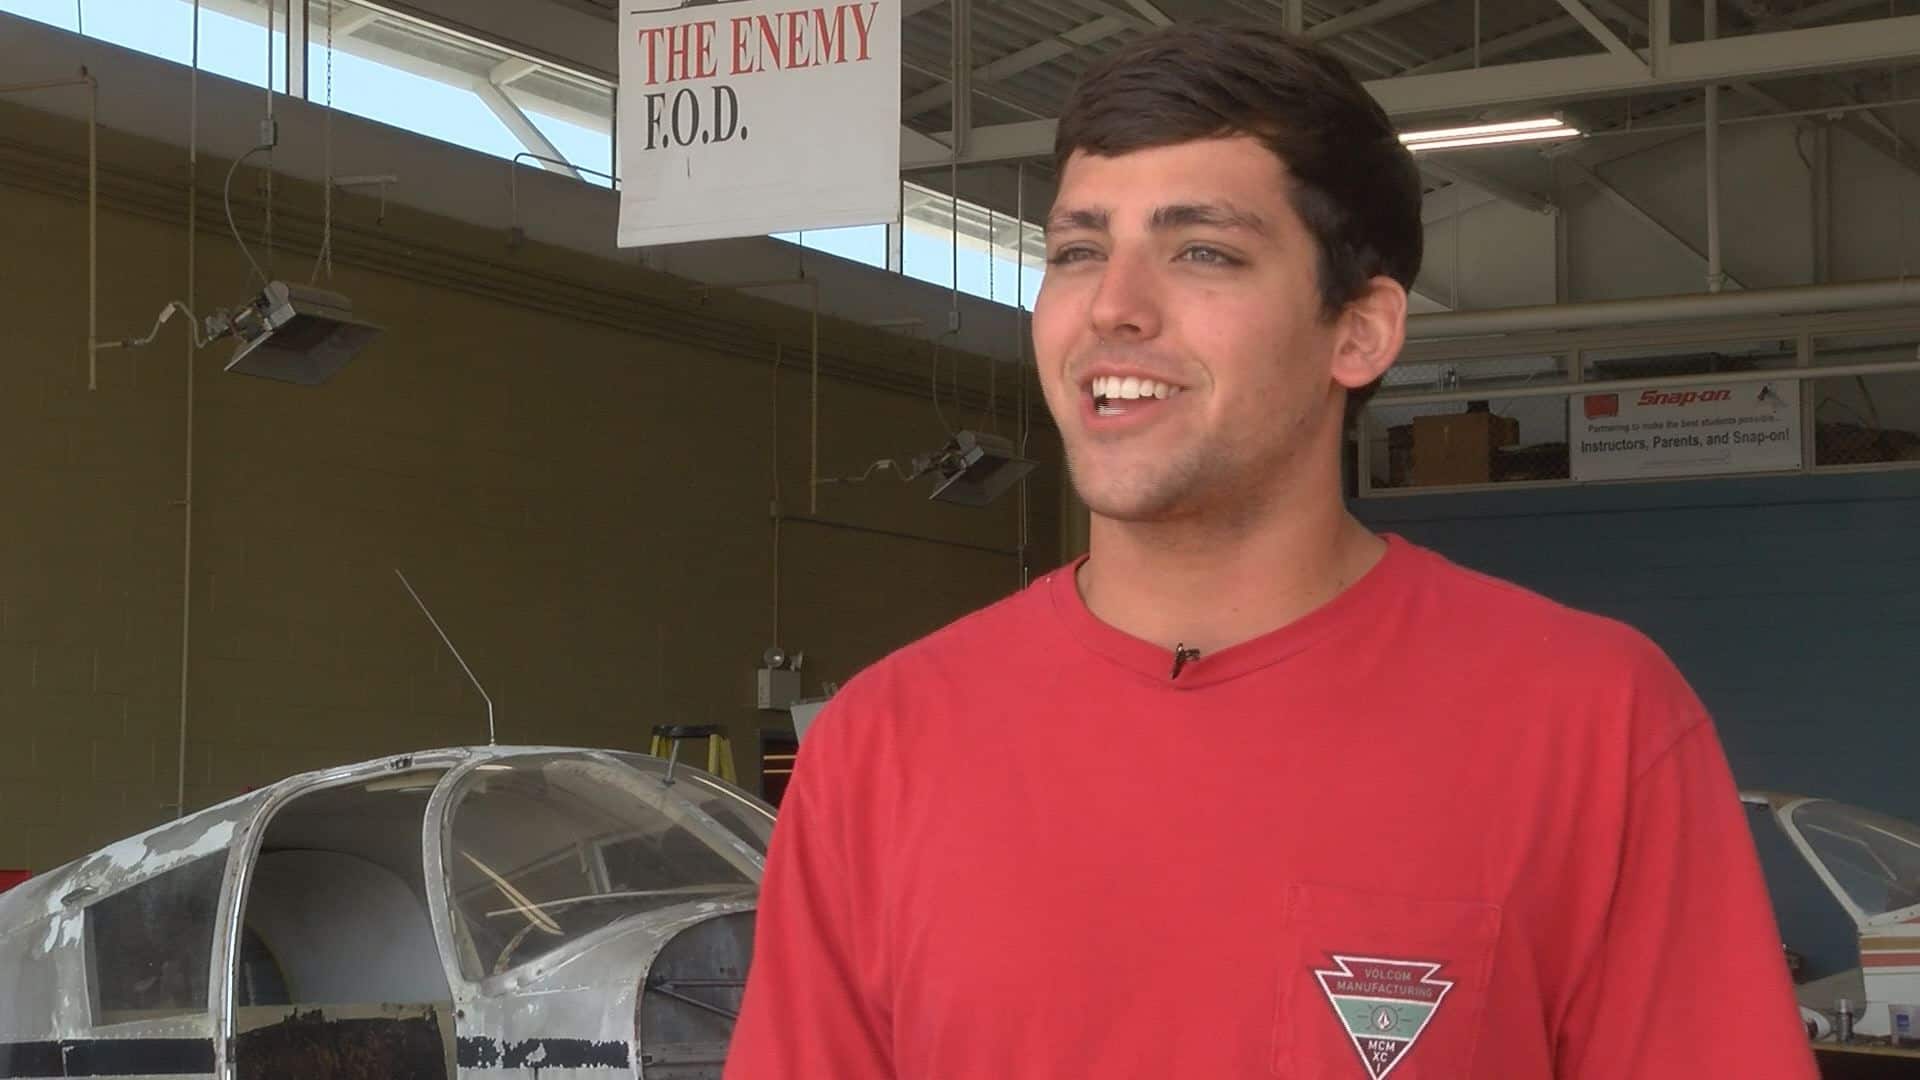 South Georgia Tech Aviation Maintenance student Bailey Mills said he loves to work on planes (Source: WALB)